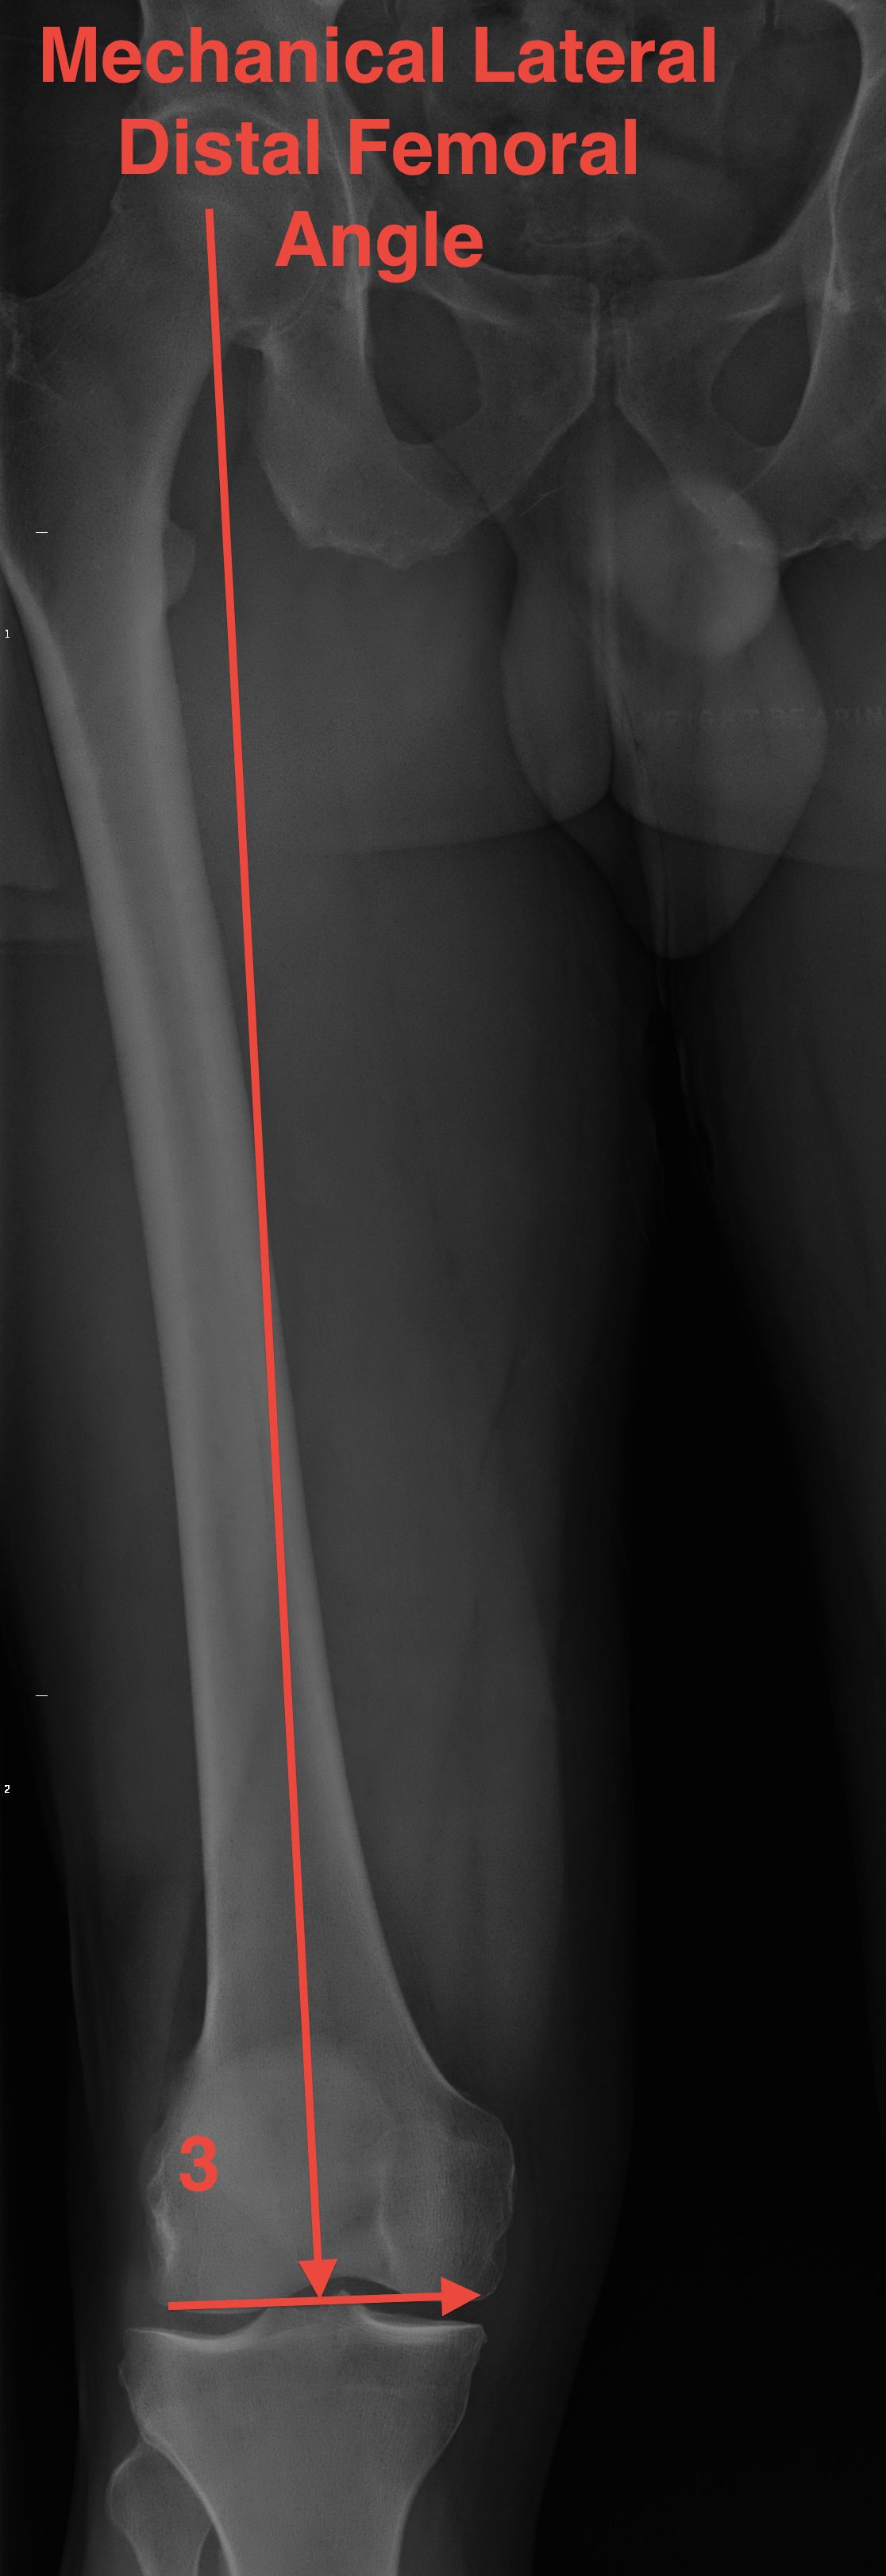 Mechanical Lateral Distal Femoral Angle